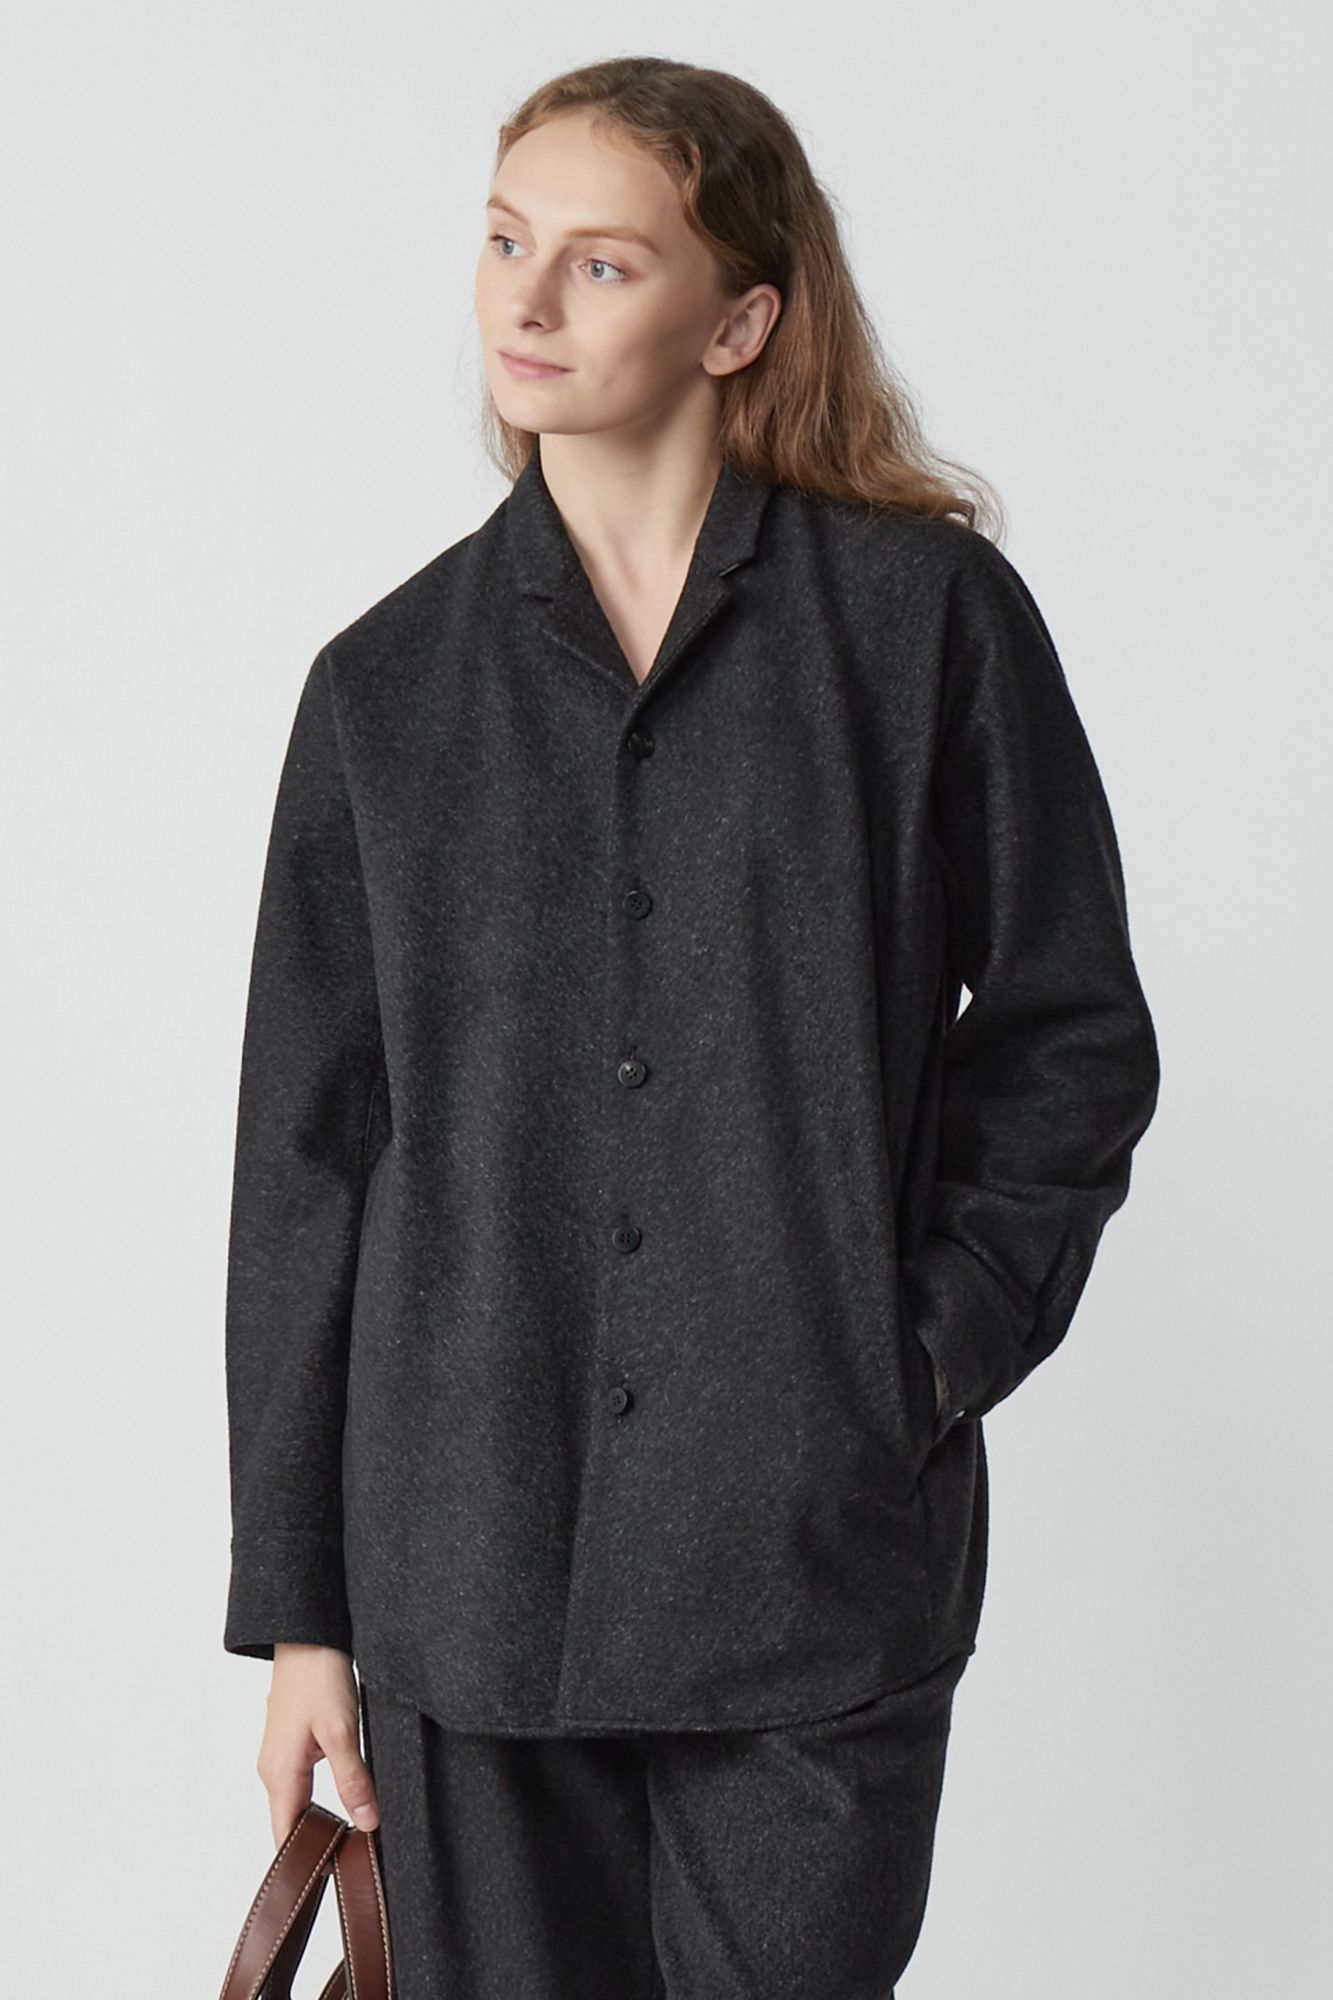  OVERCOAT(オーバーコート)/DOLMAN SLEEVE TOP WITH NOTCHED COLLAR IN WOOL FLANNEL